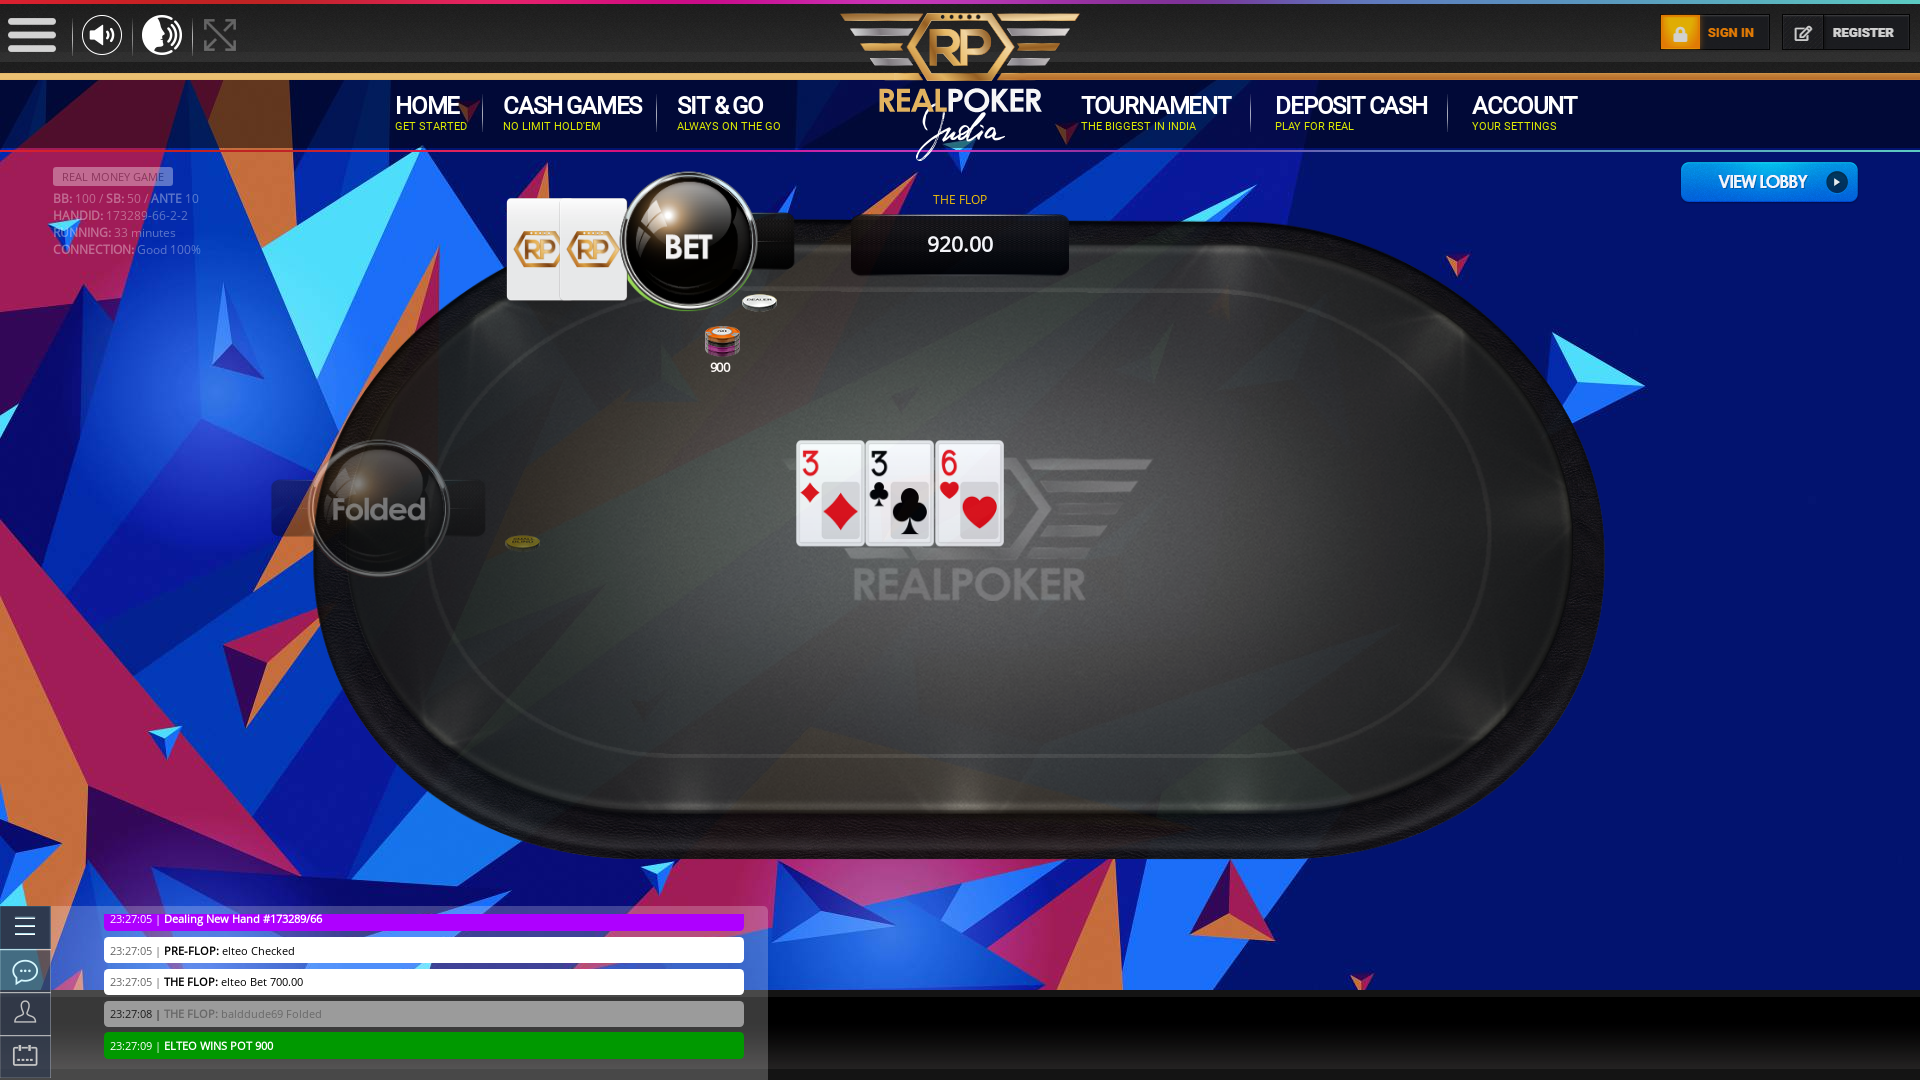 Real Indian poker on a 10 player table in the 33rd minute of the game